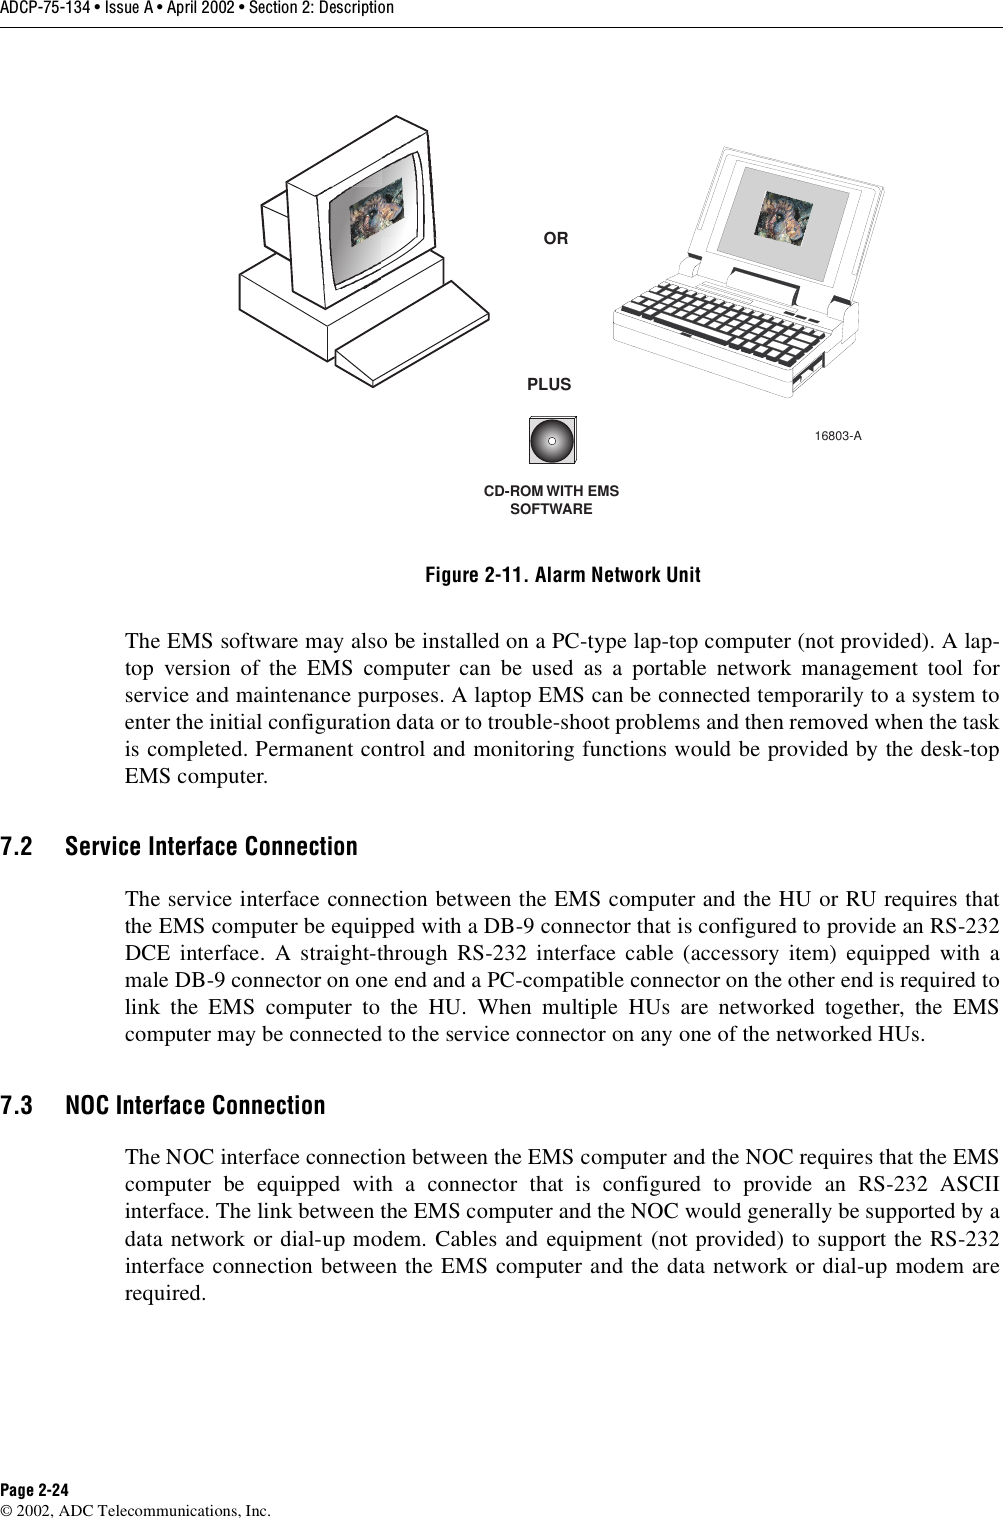 ADCP-75-134 • Issue A • April 2002 • Section 2: DescriptionPage 2-24©2002, ADC Telecommunications, Inc.Figure 2-11. Alarm Network UnitThe EMS software may also be installed on aPC-type lap-top computer (not provided). Alap-top version of the EMS computer can be used as aportable network management tool forservice and maintenance purposes. Alaptop EMS can be connected temporarily to asystem toenter the initial configuration data or to trouble-shoot problems and then removed when the taskis completed. Permanent control and monitoring functions would be provided by the desk-topEMS computer.7.2 Service Interface ConnectionThe service interface connection between the EMS computer and the HU or RU requires thatthe EMS computer be equipped with aDB-9 connector that is configured to provide an RS-232DCE interface. Astraight-through RS-232 interface cable (accessory item) equipped with amale DB-9 connector on one end and aPC-compatible connector on the other end is required tolink the EMS computer to the HU. When multiple HUs are networked together, the EMScomputer may be connected to the service connector on any one of the networked HUs.7.3 NOC Interface ConnectionThe NOC interface connection between the EMS computer and the NOC requires that the EMScomputer be equipped with aconnector that is configured to provide an RS-232 ASCIIinterface. The link between the EMS computer and the NOC would generally be supported by adata network or dial-up modem. Cables and equipment (not provided) to support the RS-232interface connection between the EMS computer and the data network or dial-up modem arerequired.CD-ROM WITH EMSSOFTWAREORPLUS16803-A